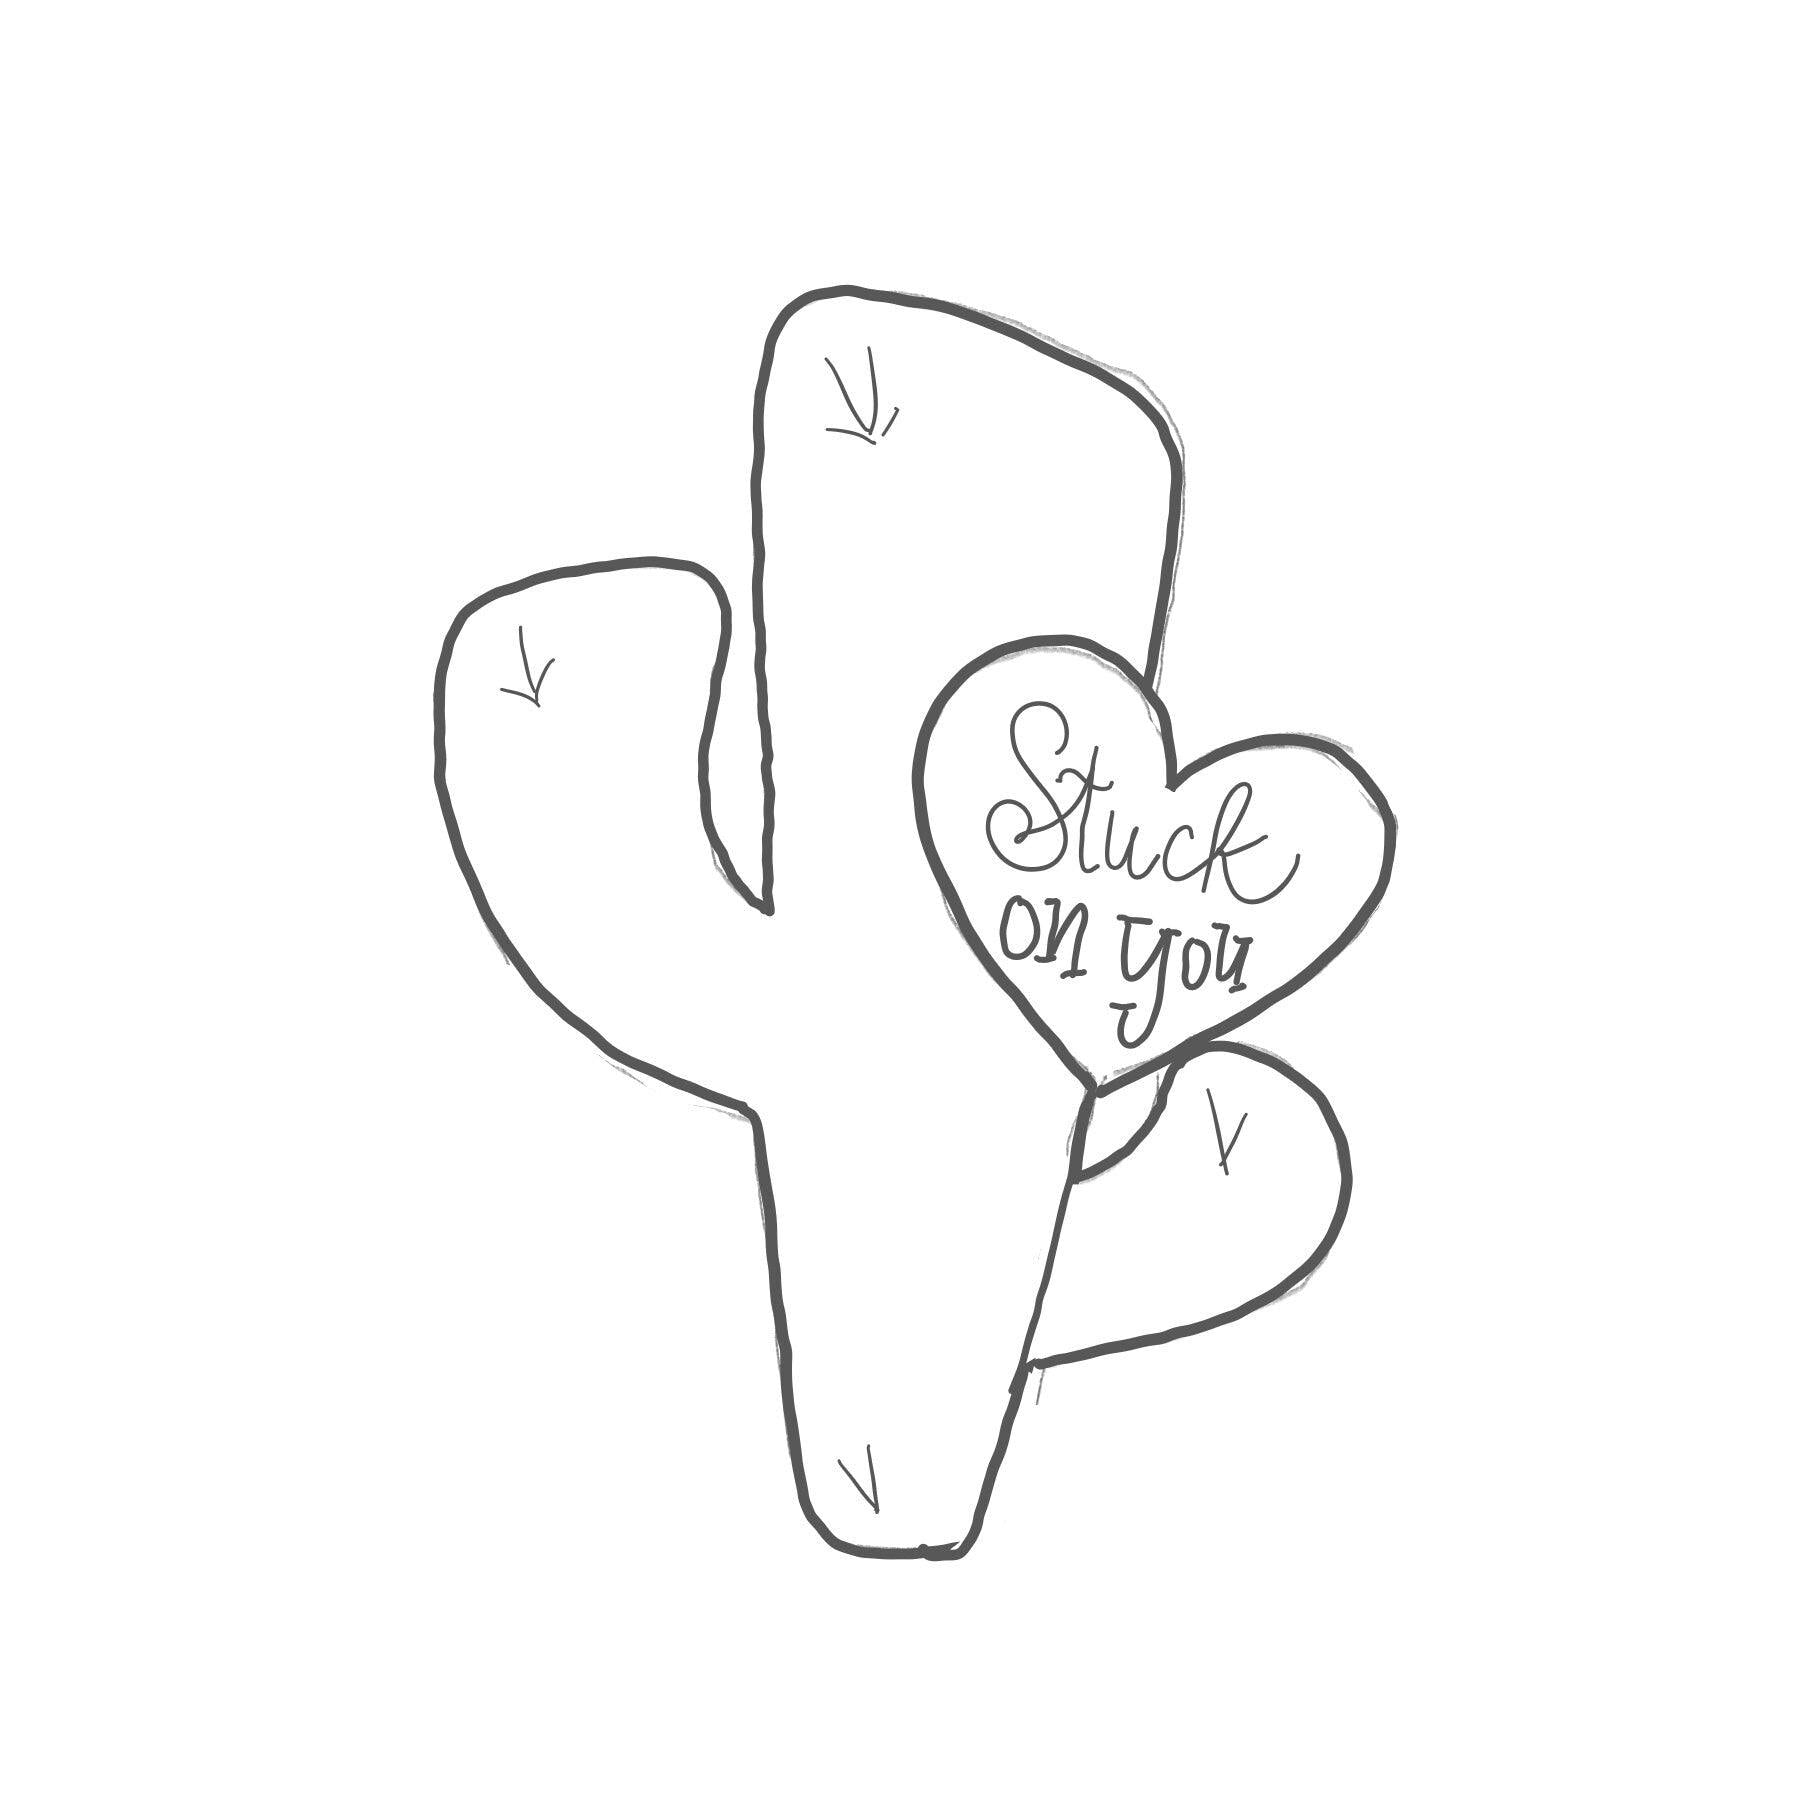 Cactus with Heart Cookie Cutter. - Sweetleigh 